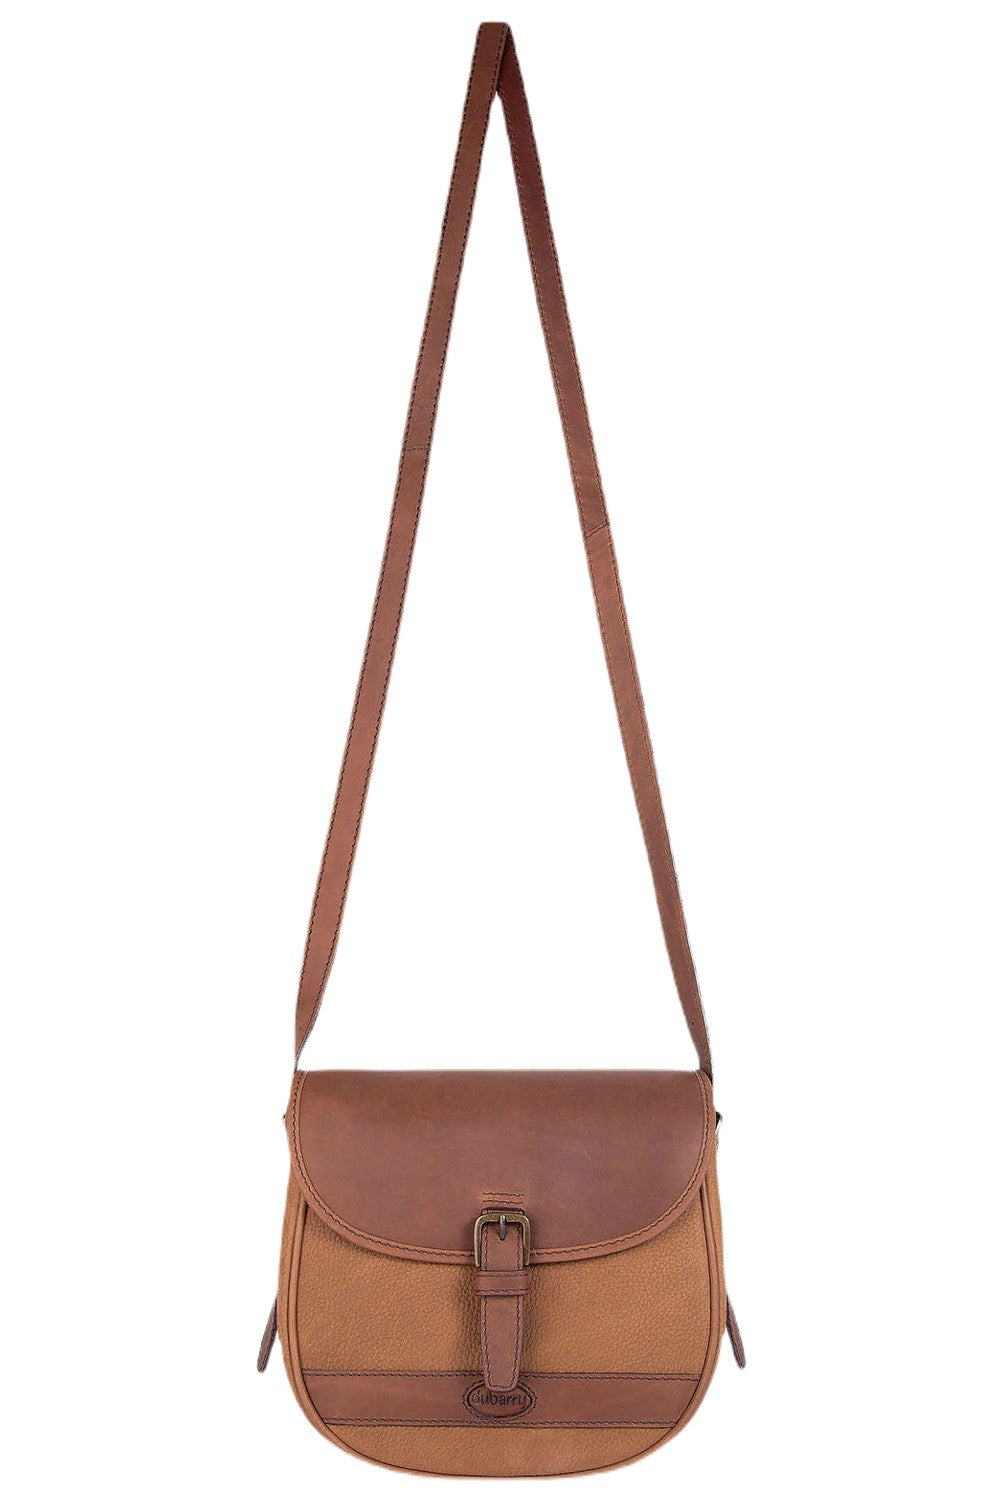 Dubarry Clara Leather Saddle Bag in Brown